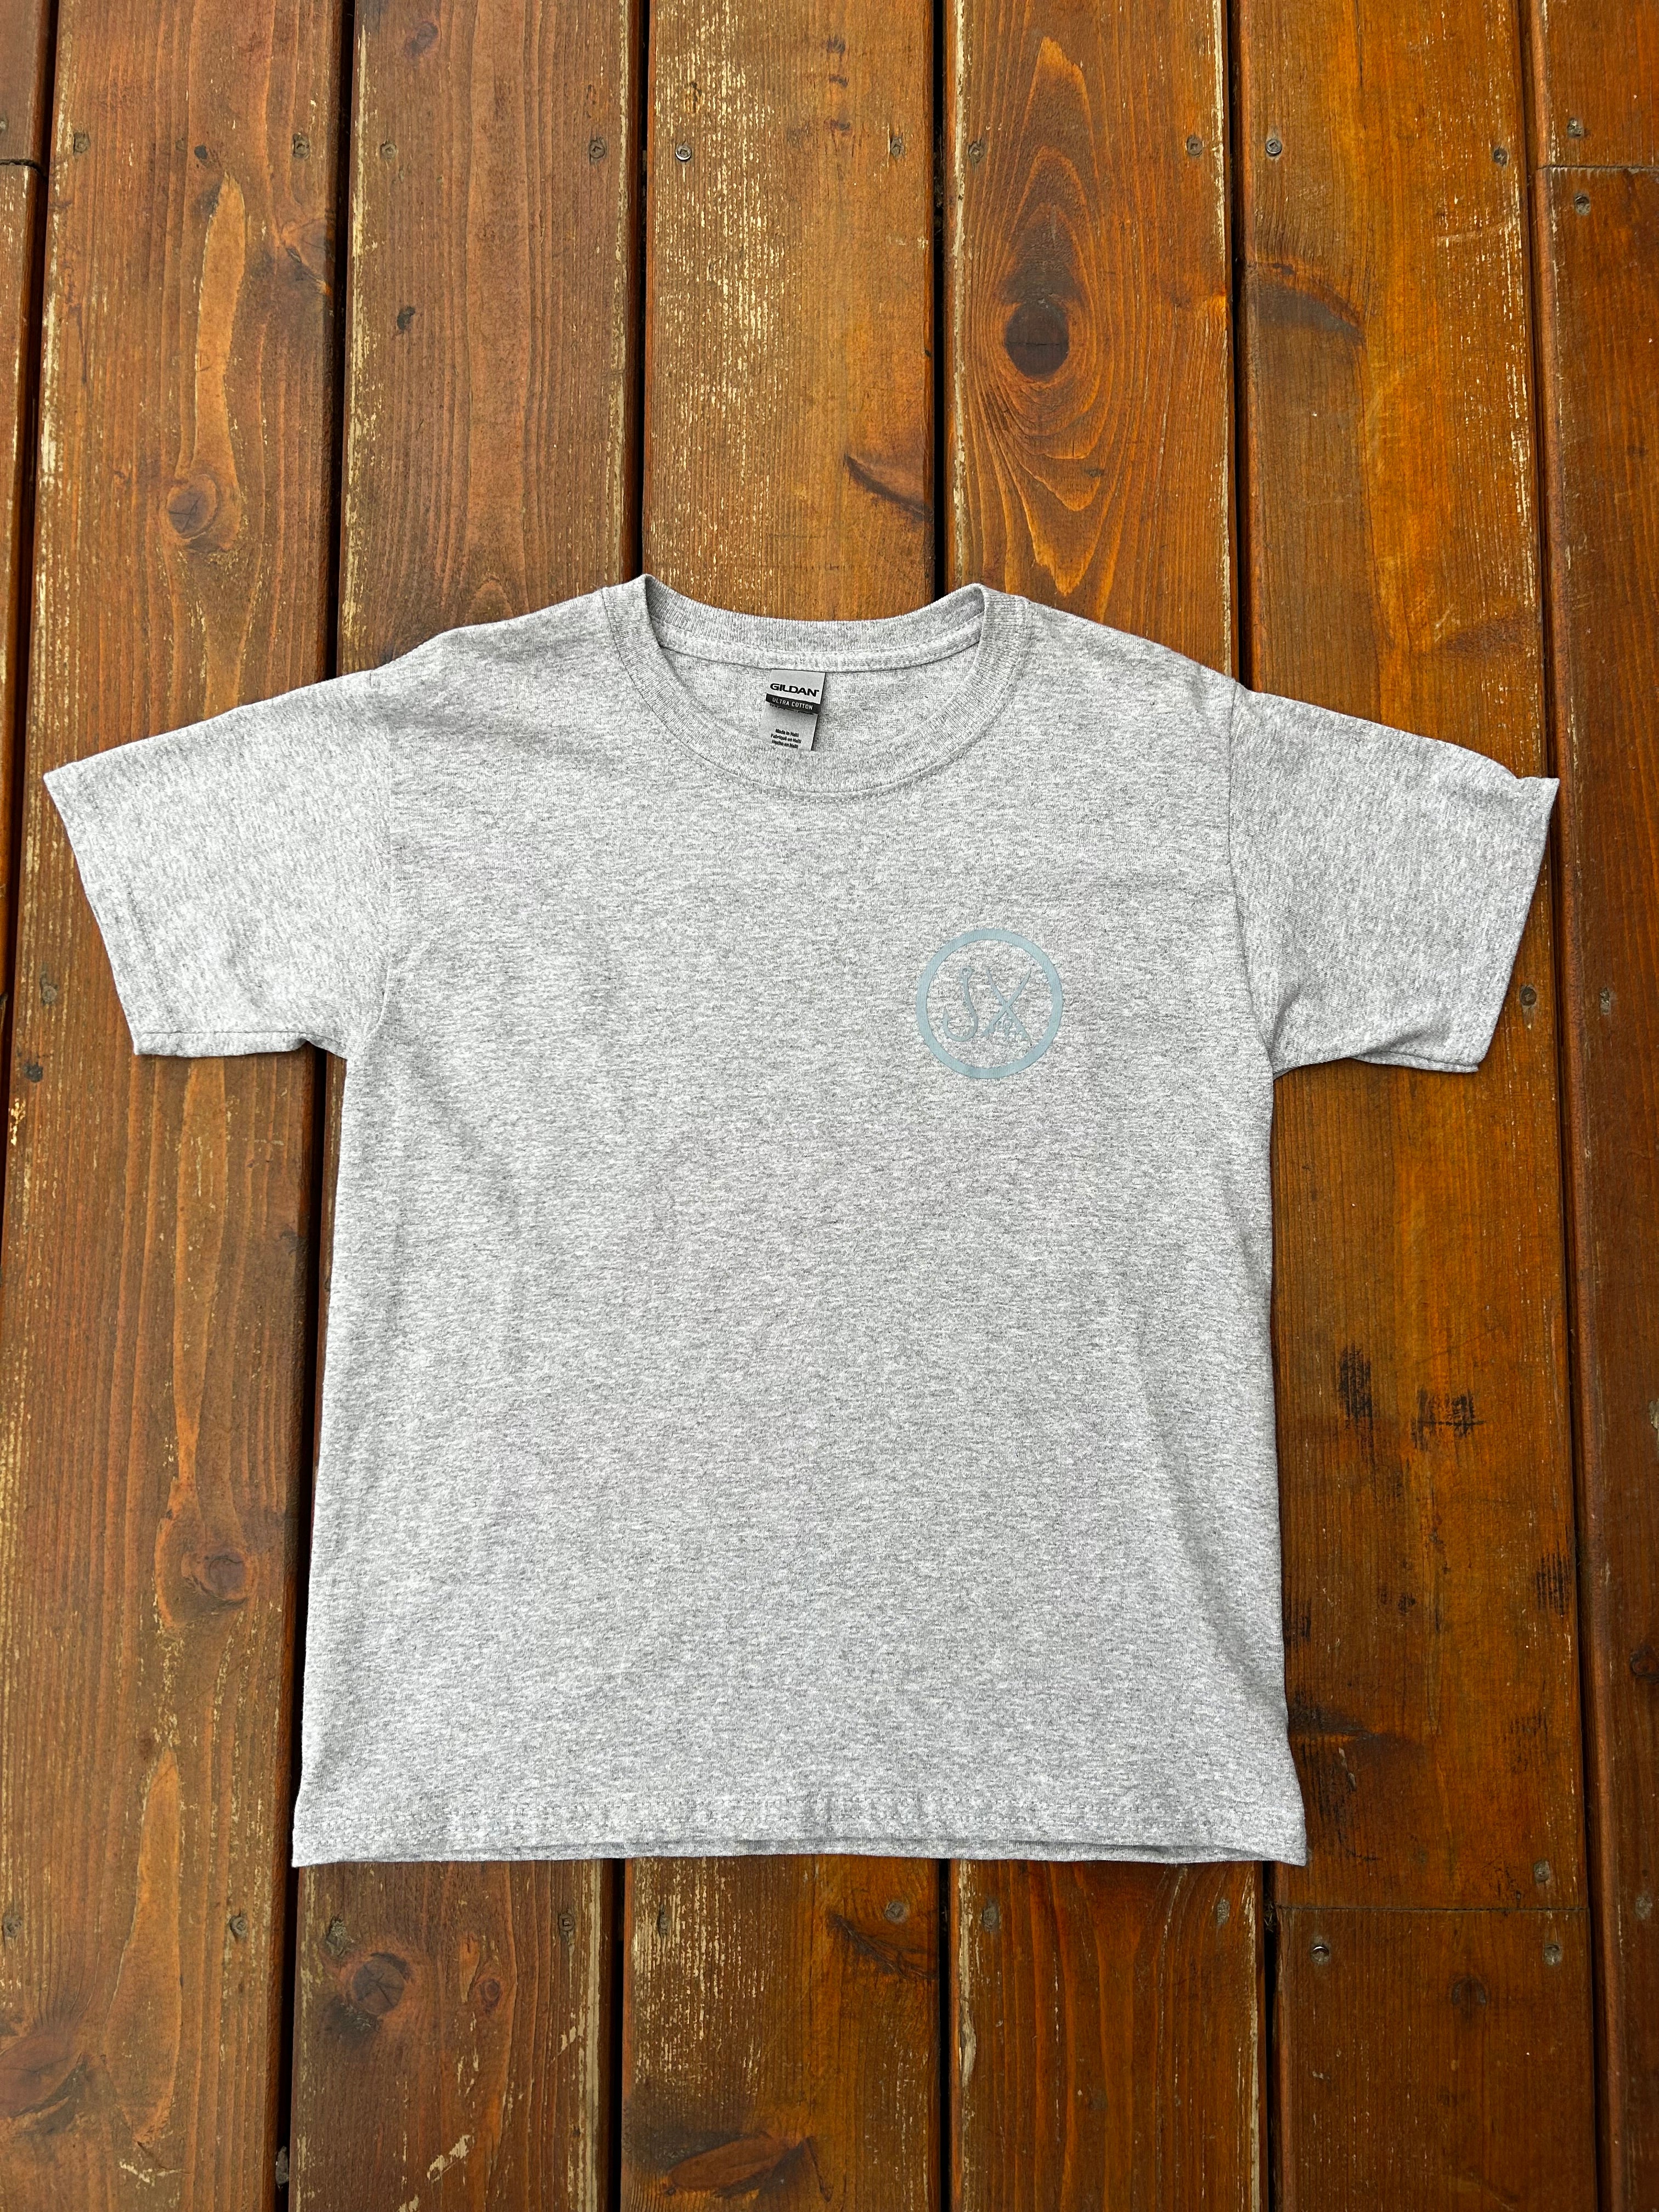 JX by Relic Youth T-shirt